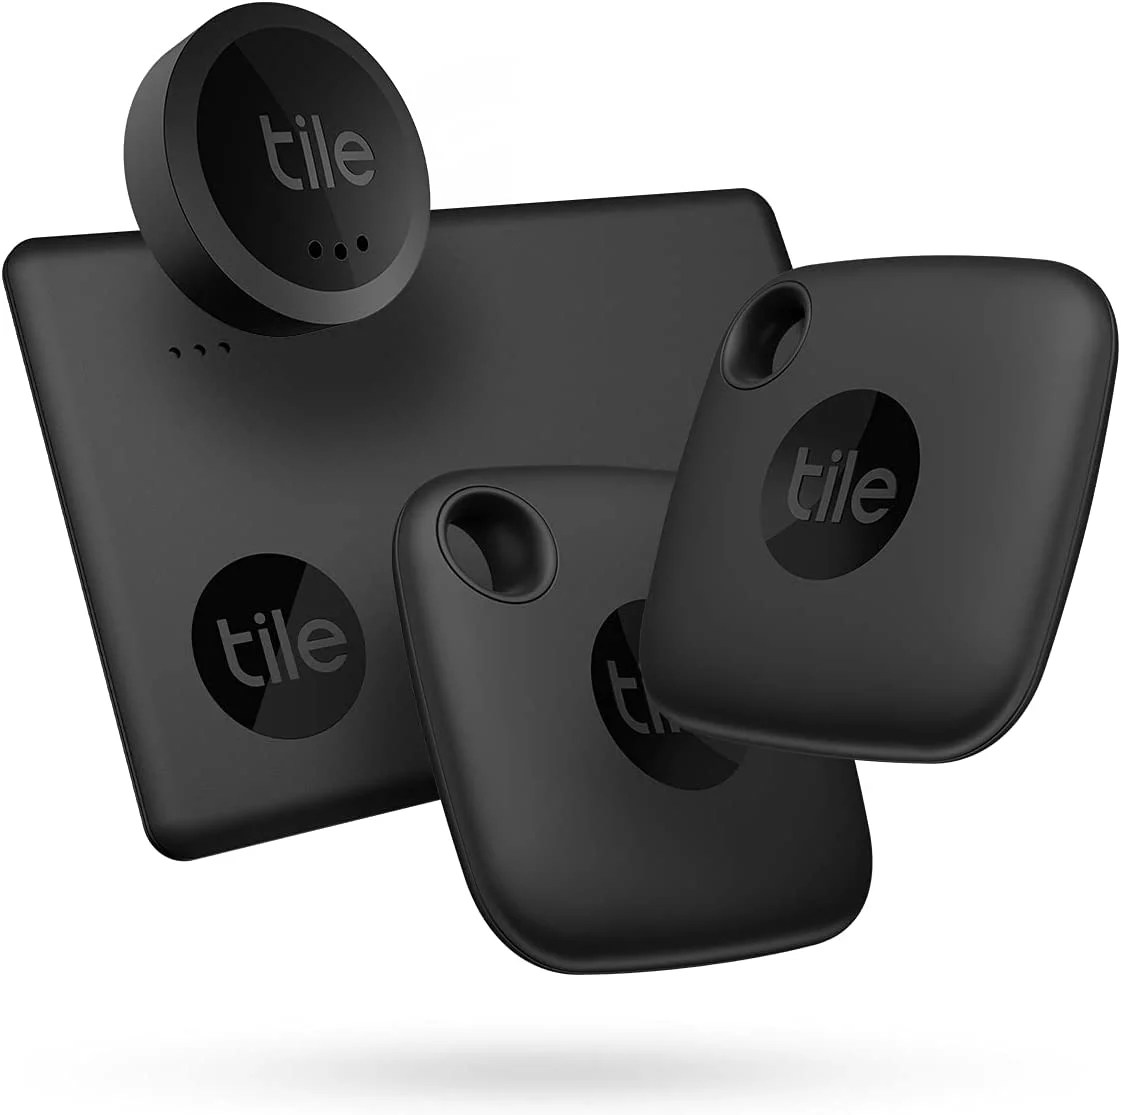 tile mate essentials trackers, best gifts for adhd adults